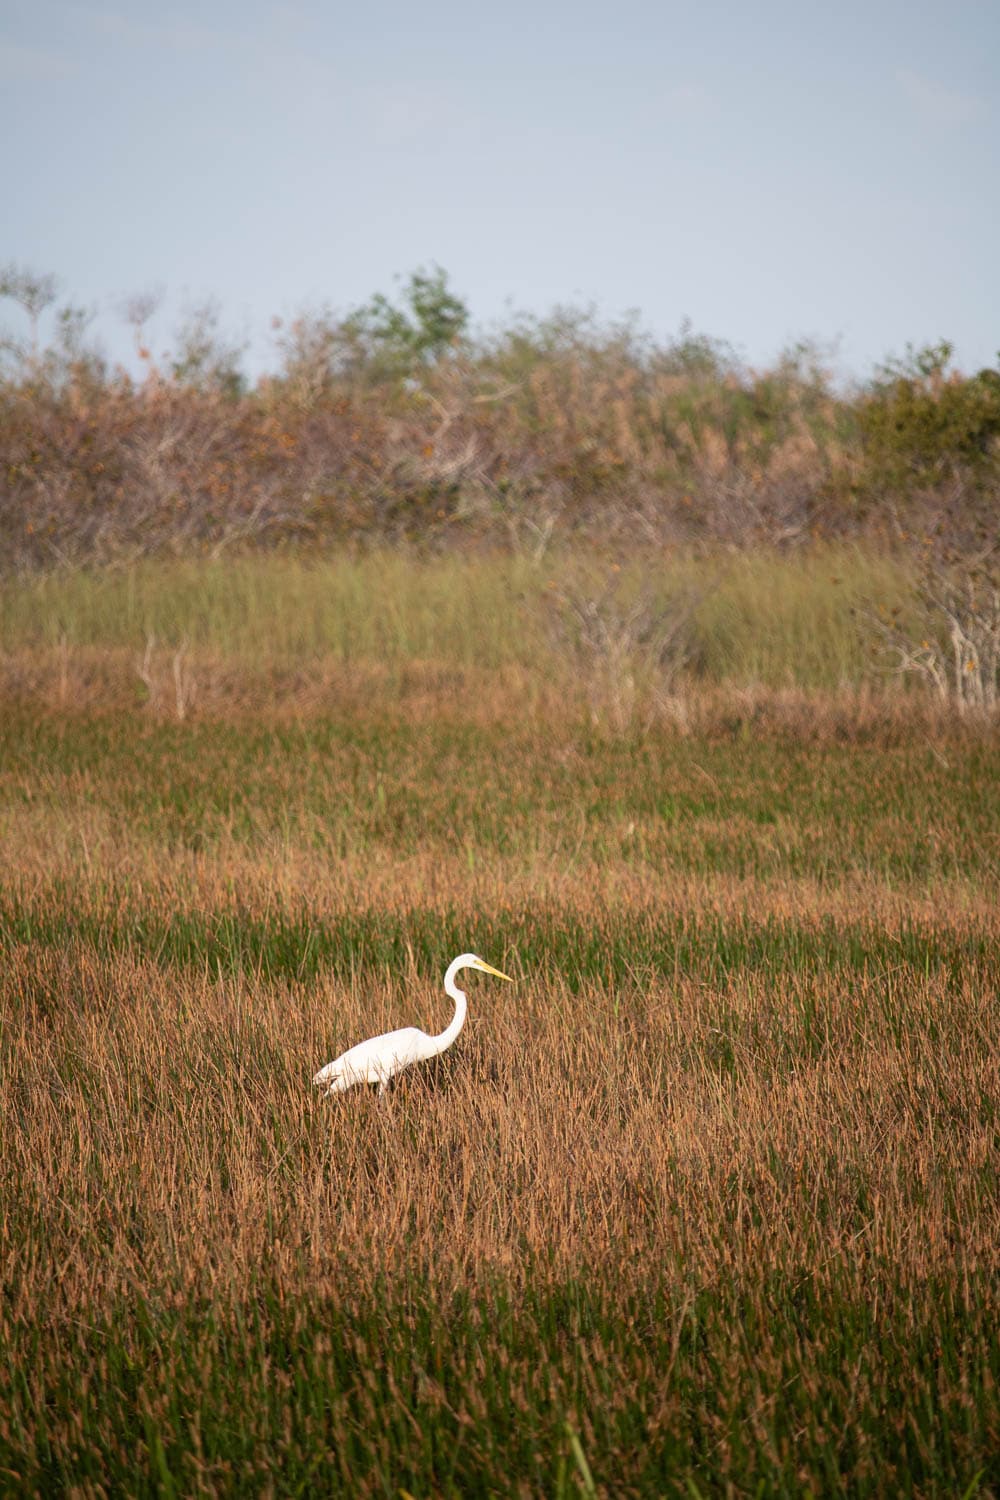 Great egret at Royal Palm in Everglades National Park, Florida